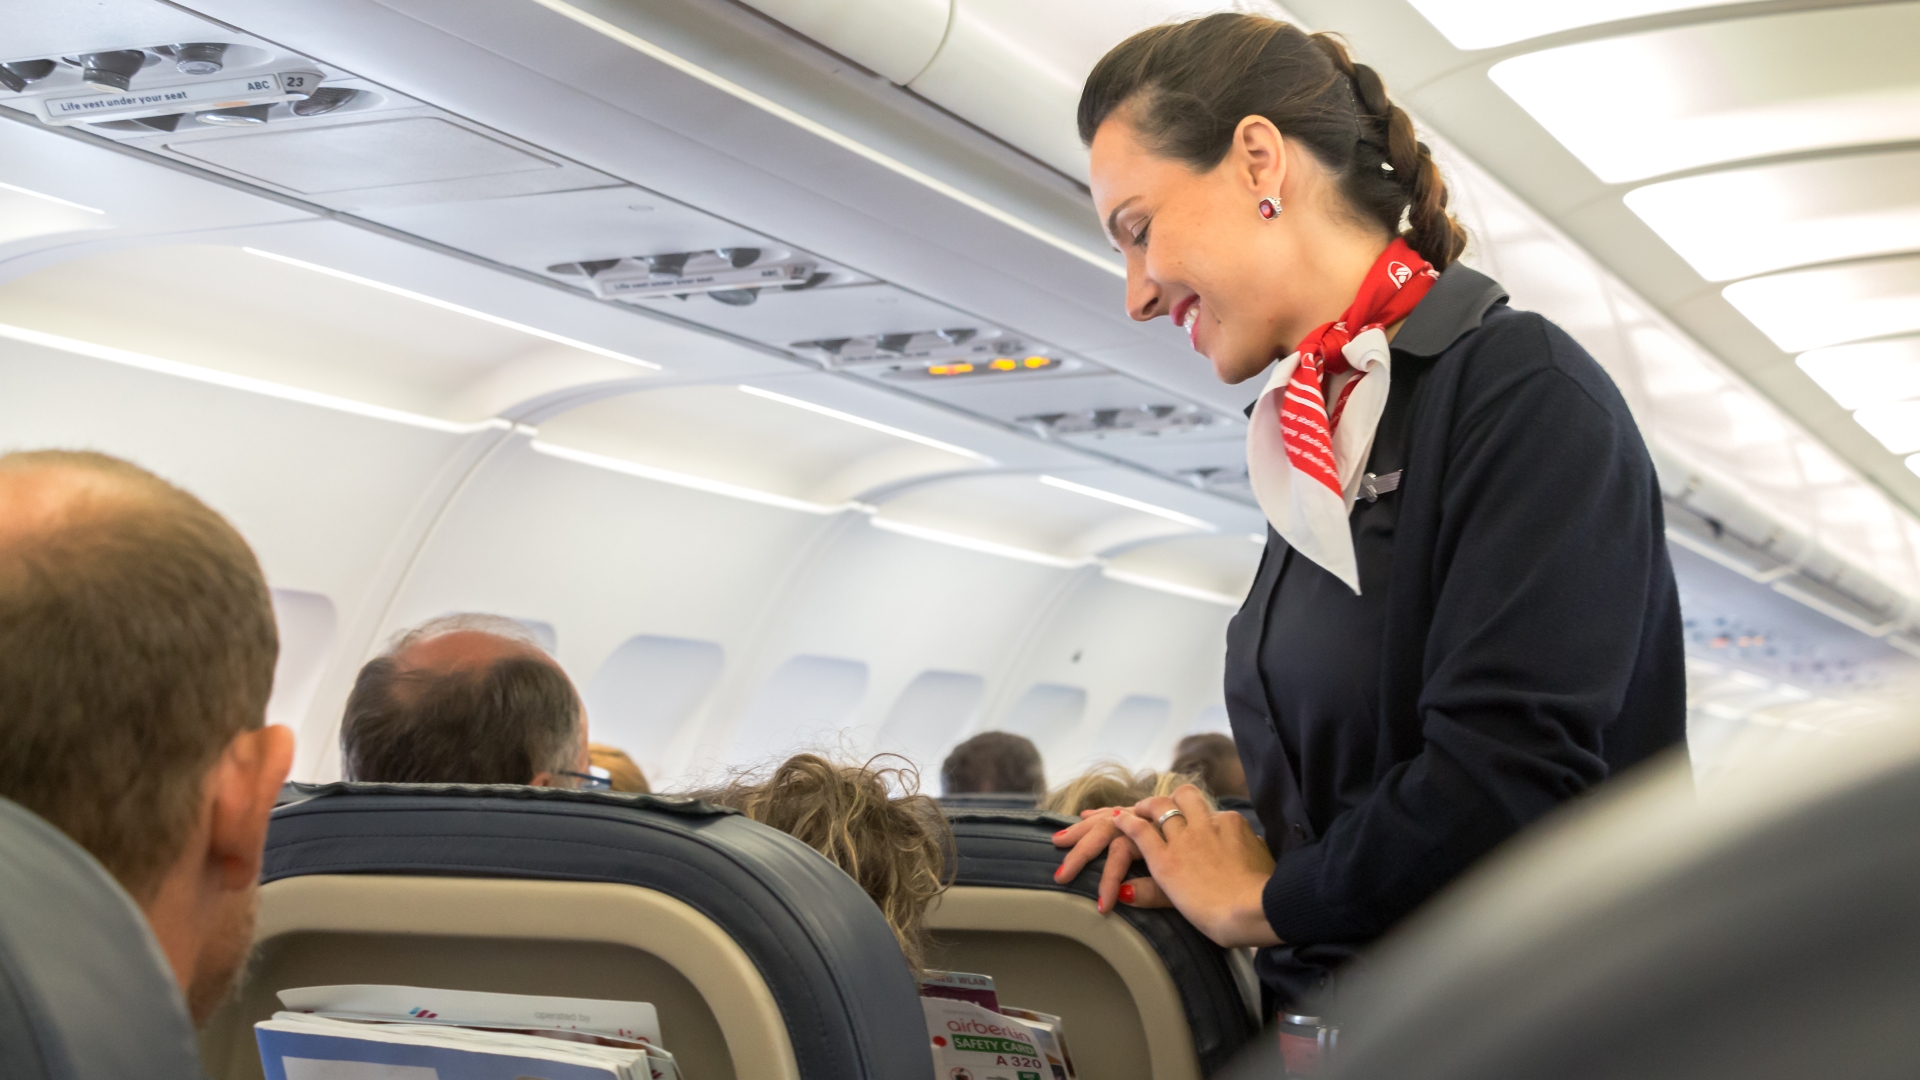 I’m a flight attendant – here is what you should do when sitting next to a rude passenger